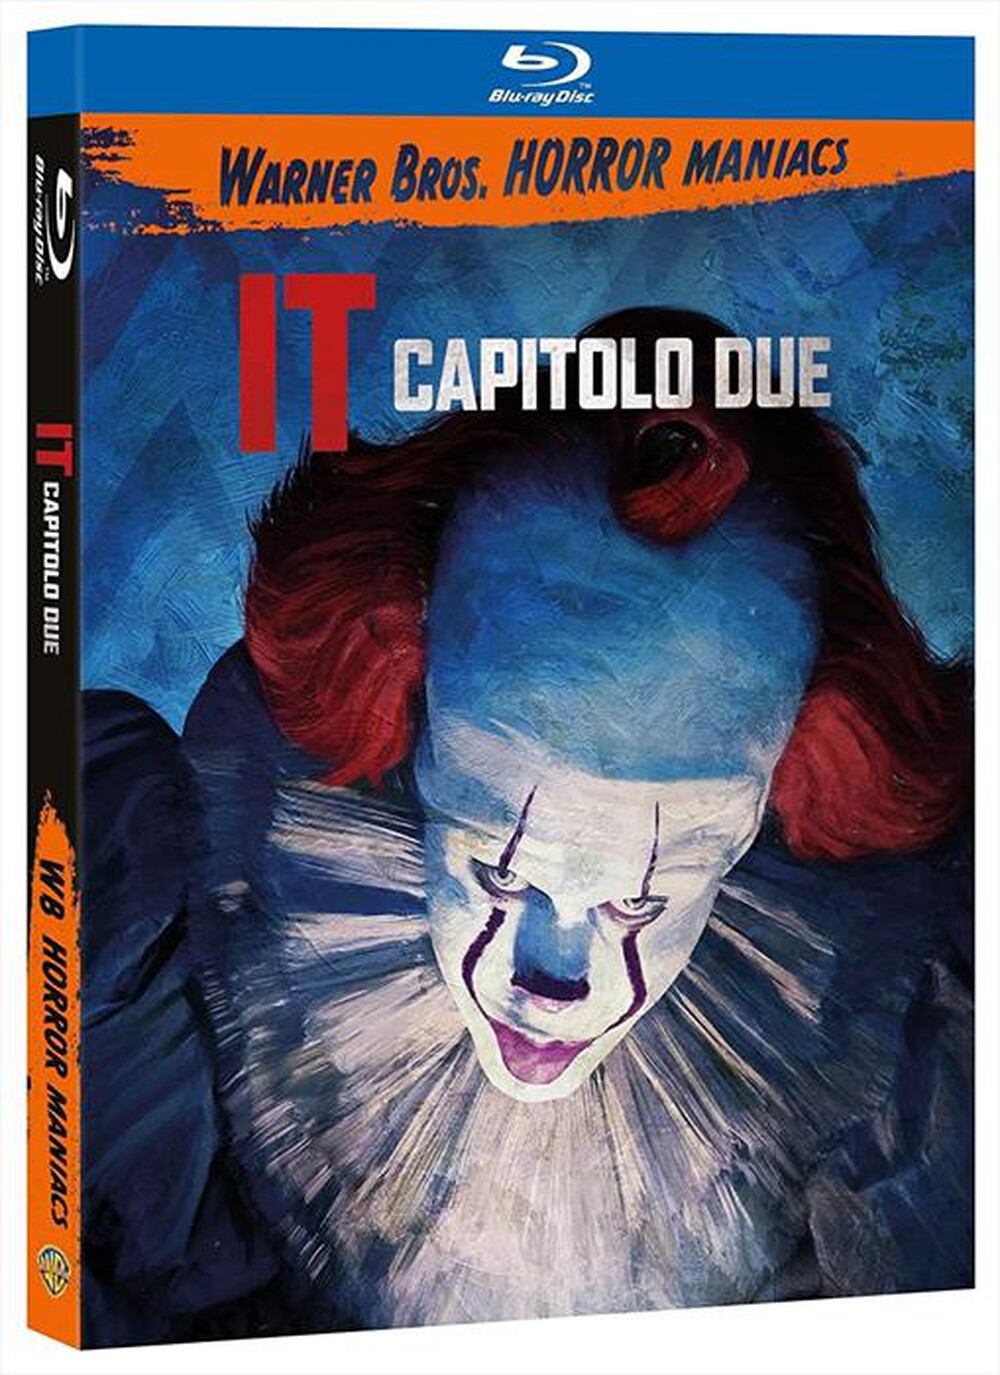 "WARNER HOME VIDEO - It Capitolo Due (Horror Maniacs Collection)"